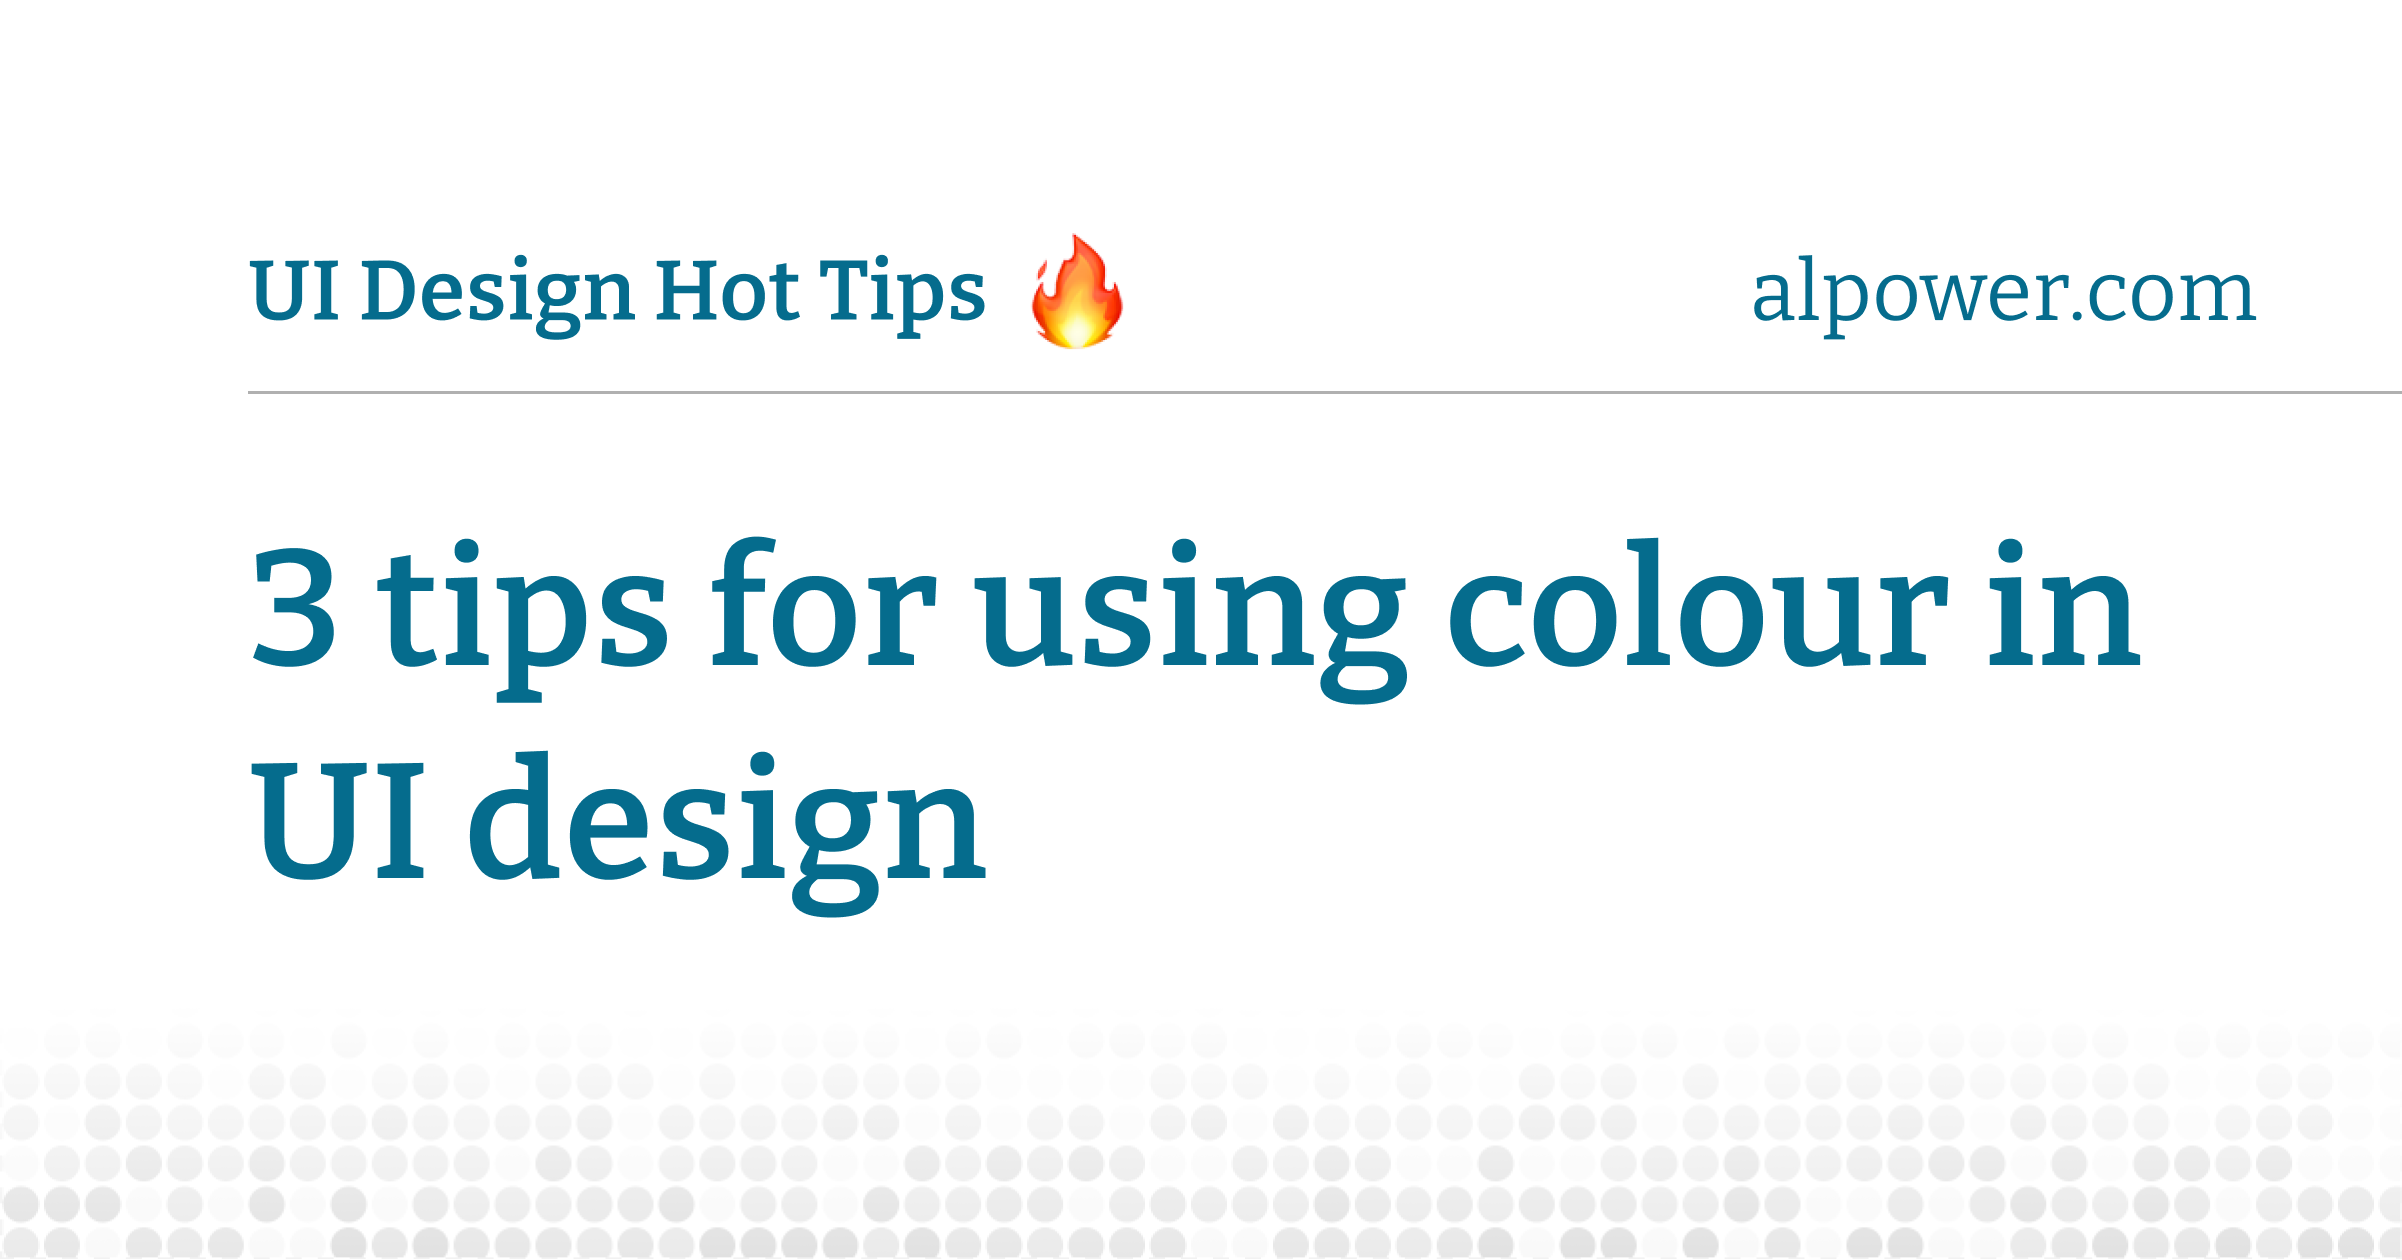 3 tips for using colour in UI design